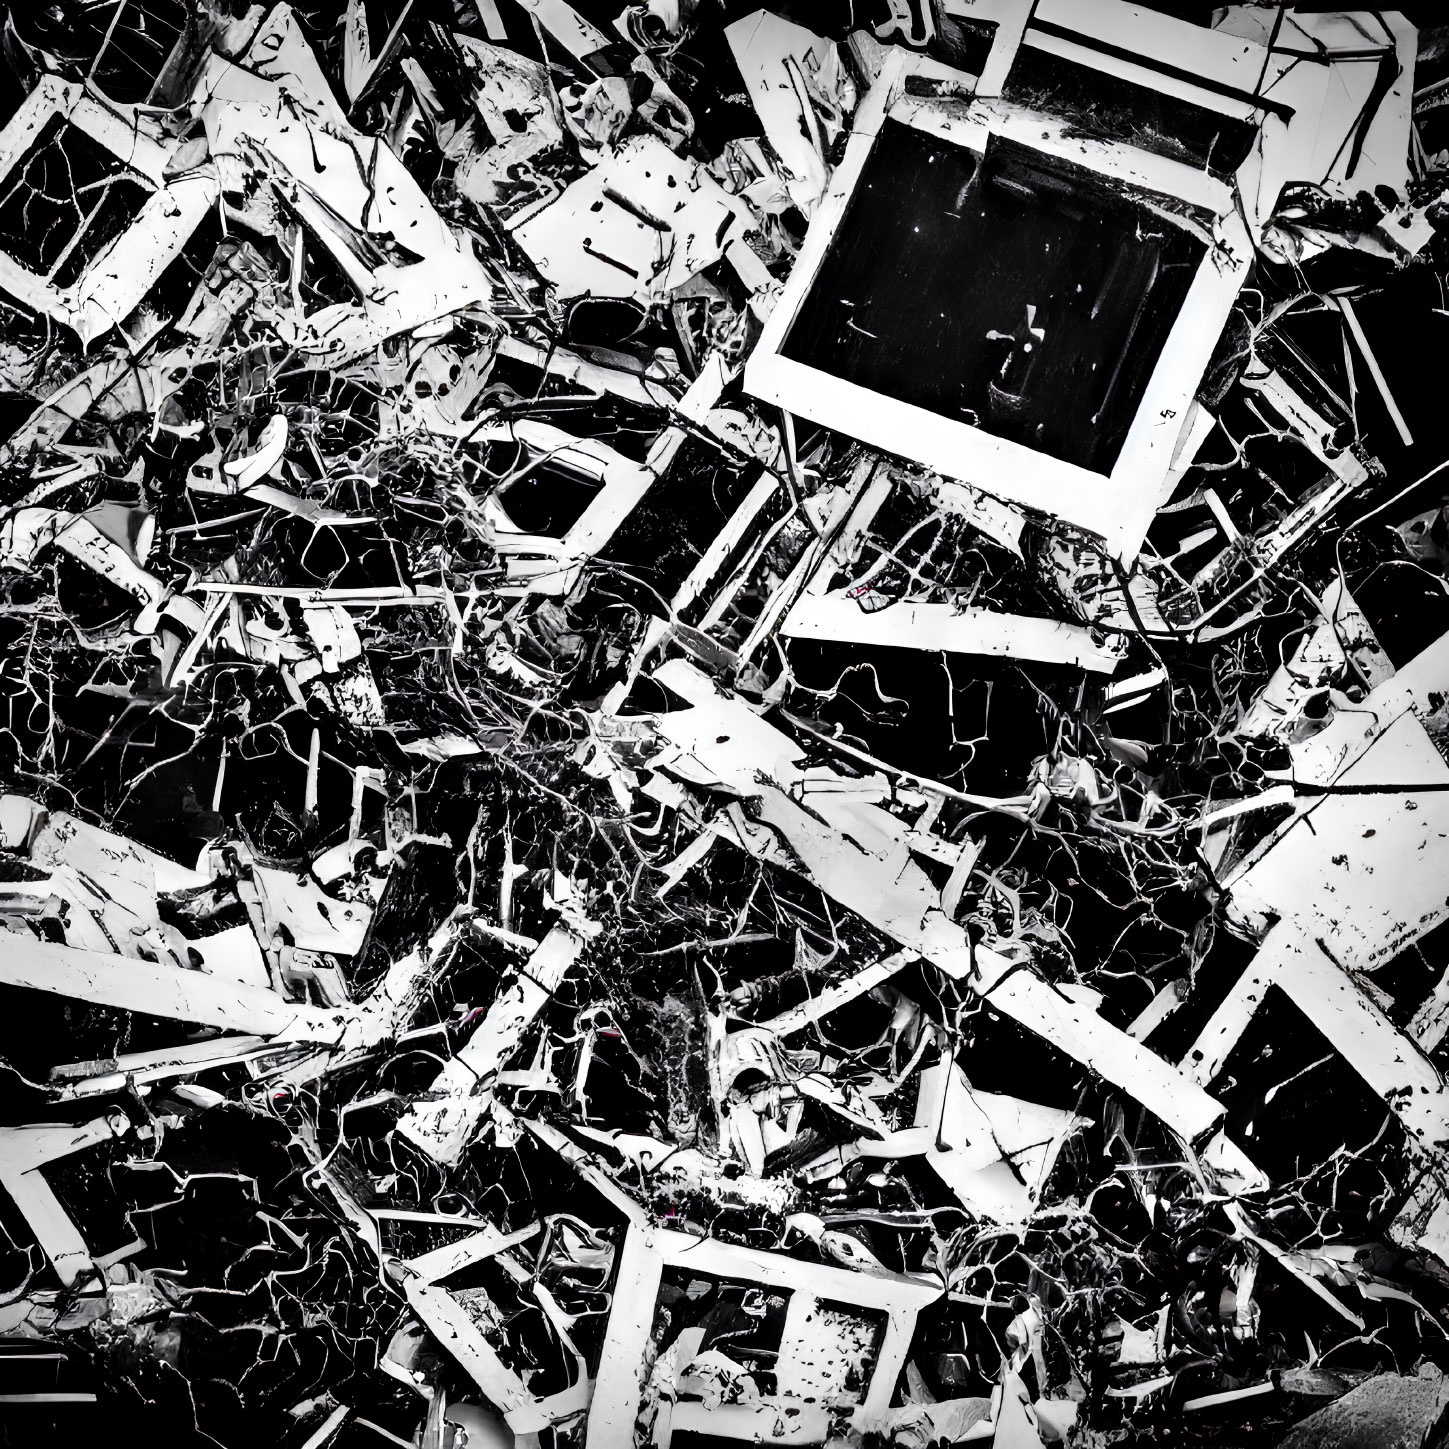 Pile of White Frames and Shattered Glass in Disarray